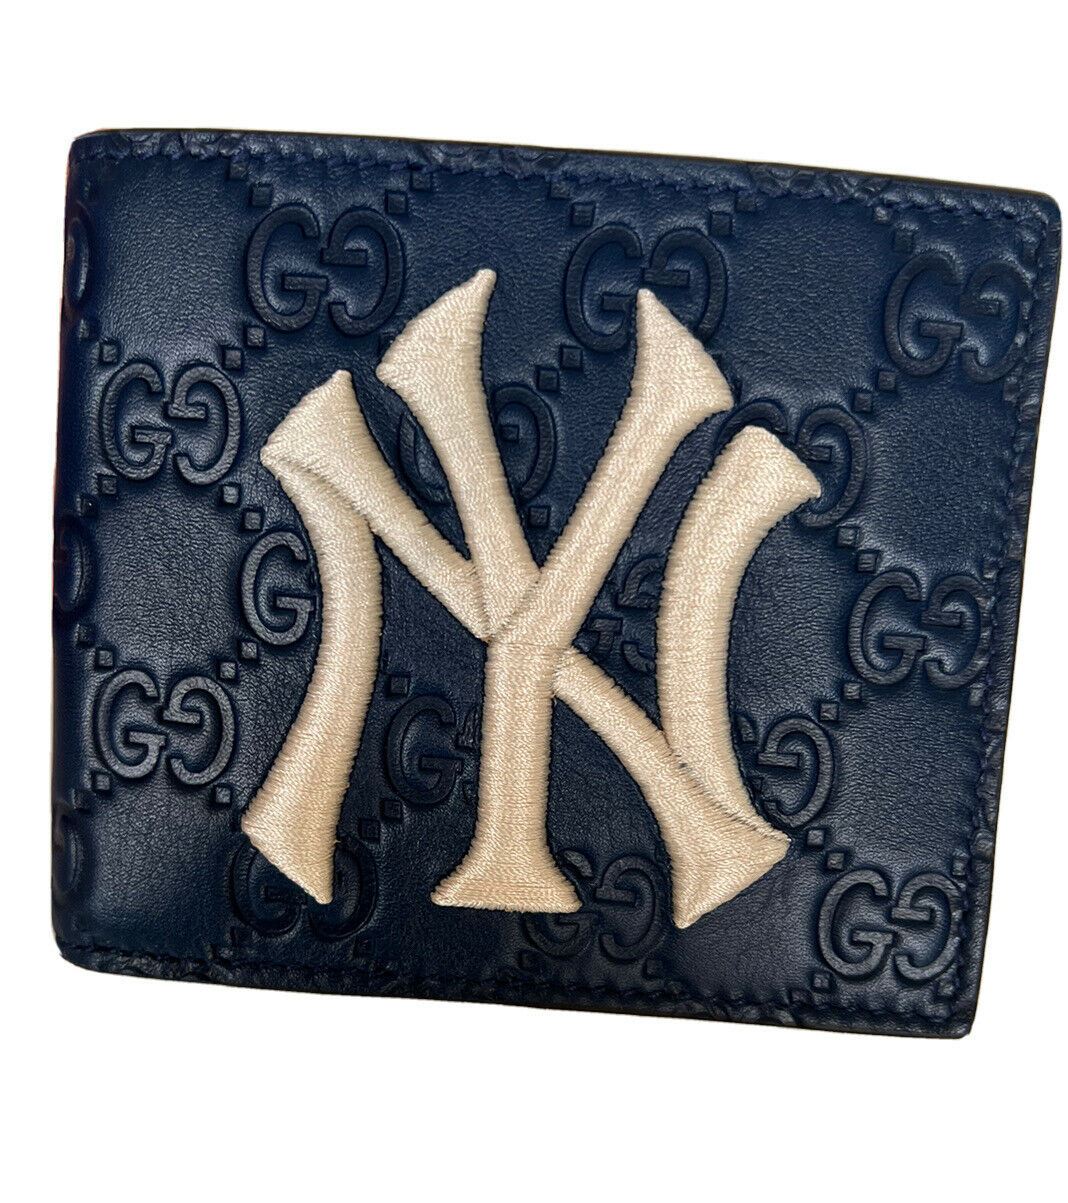 New Gucci GG NY Yankees Bifold Leather Wallet Blue Made in Italy 547787